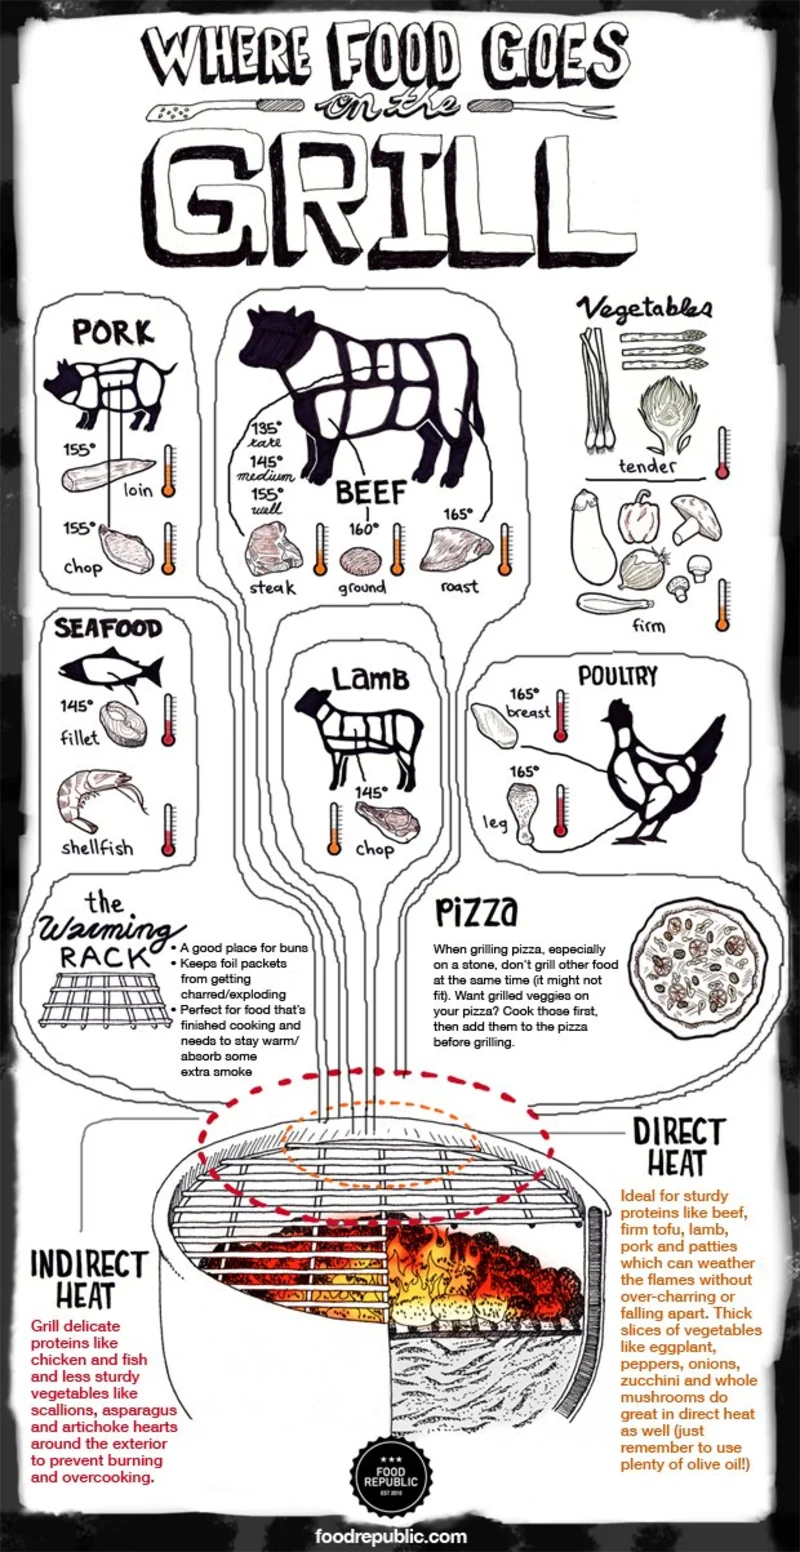 Grilling Guide